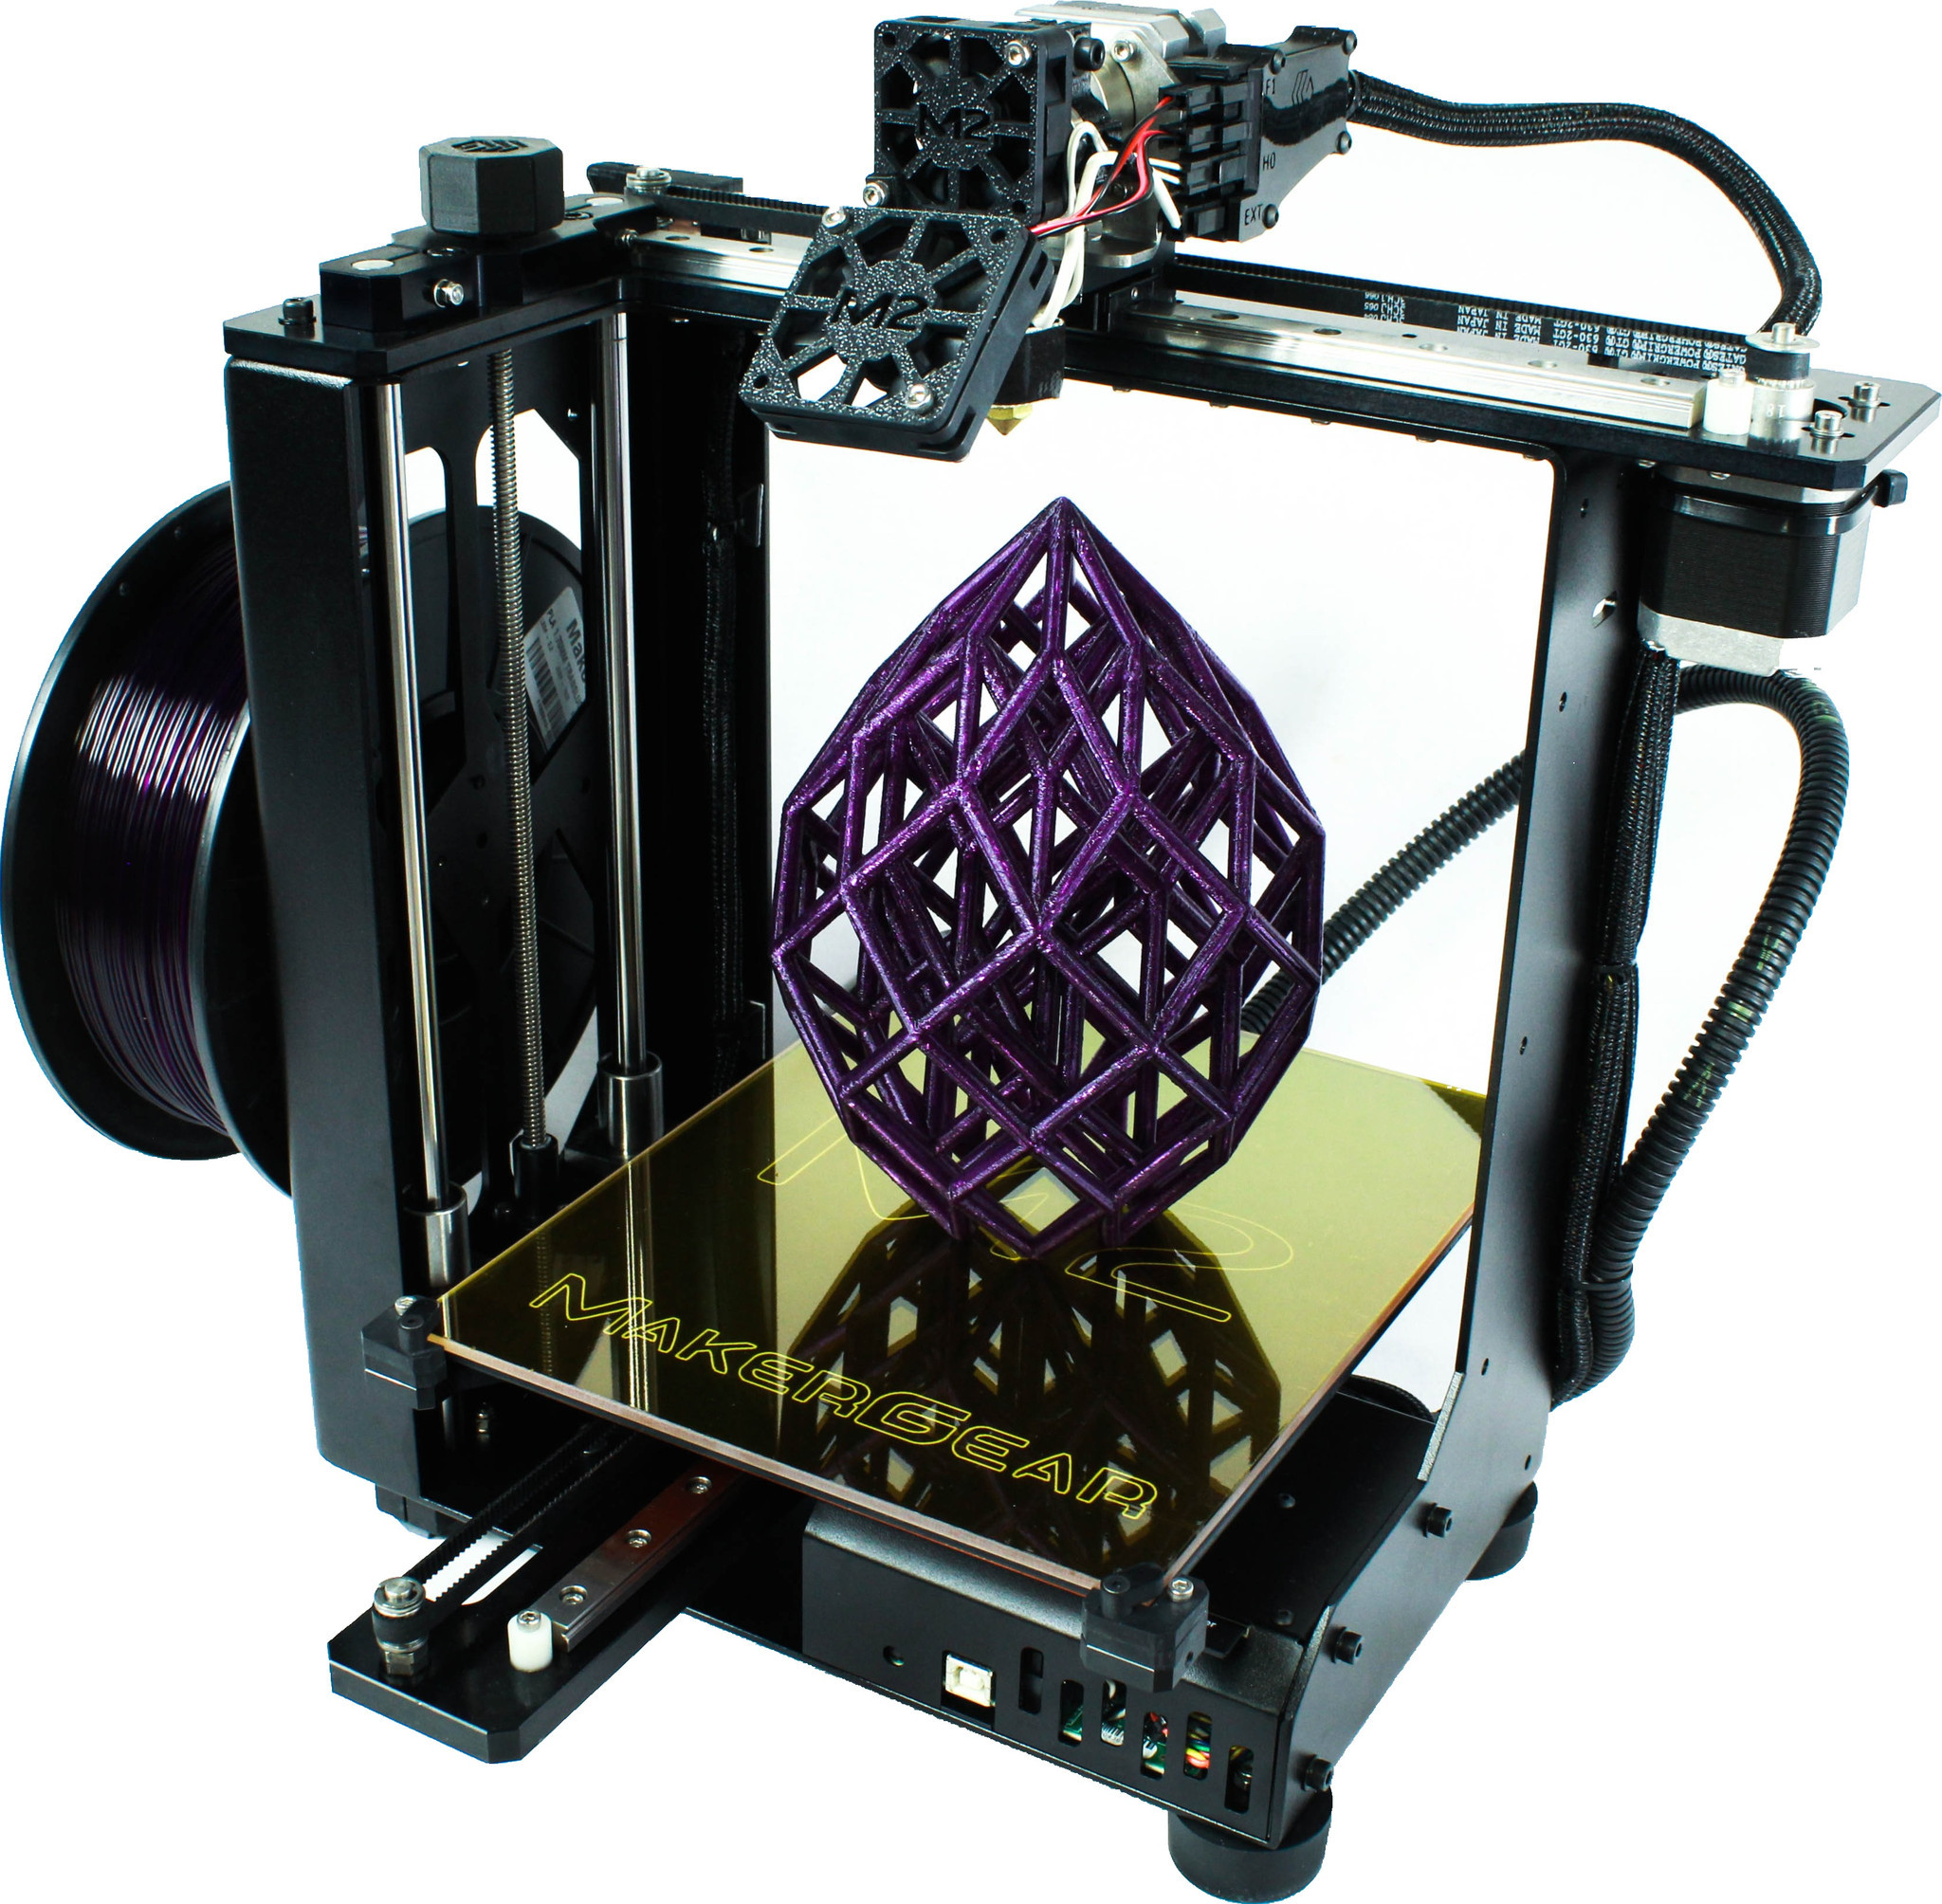 The Hottest 3D Printers in the Market for 2017 - M2Rev.E